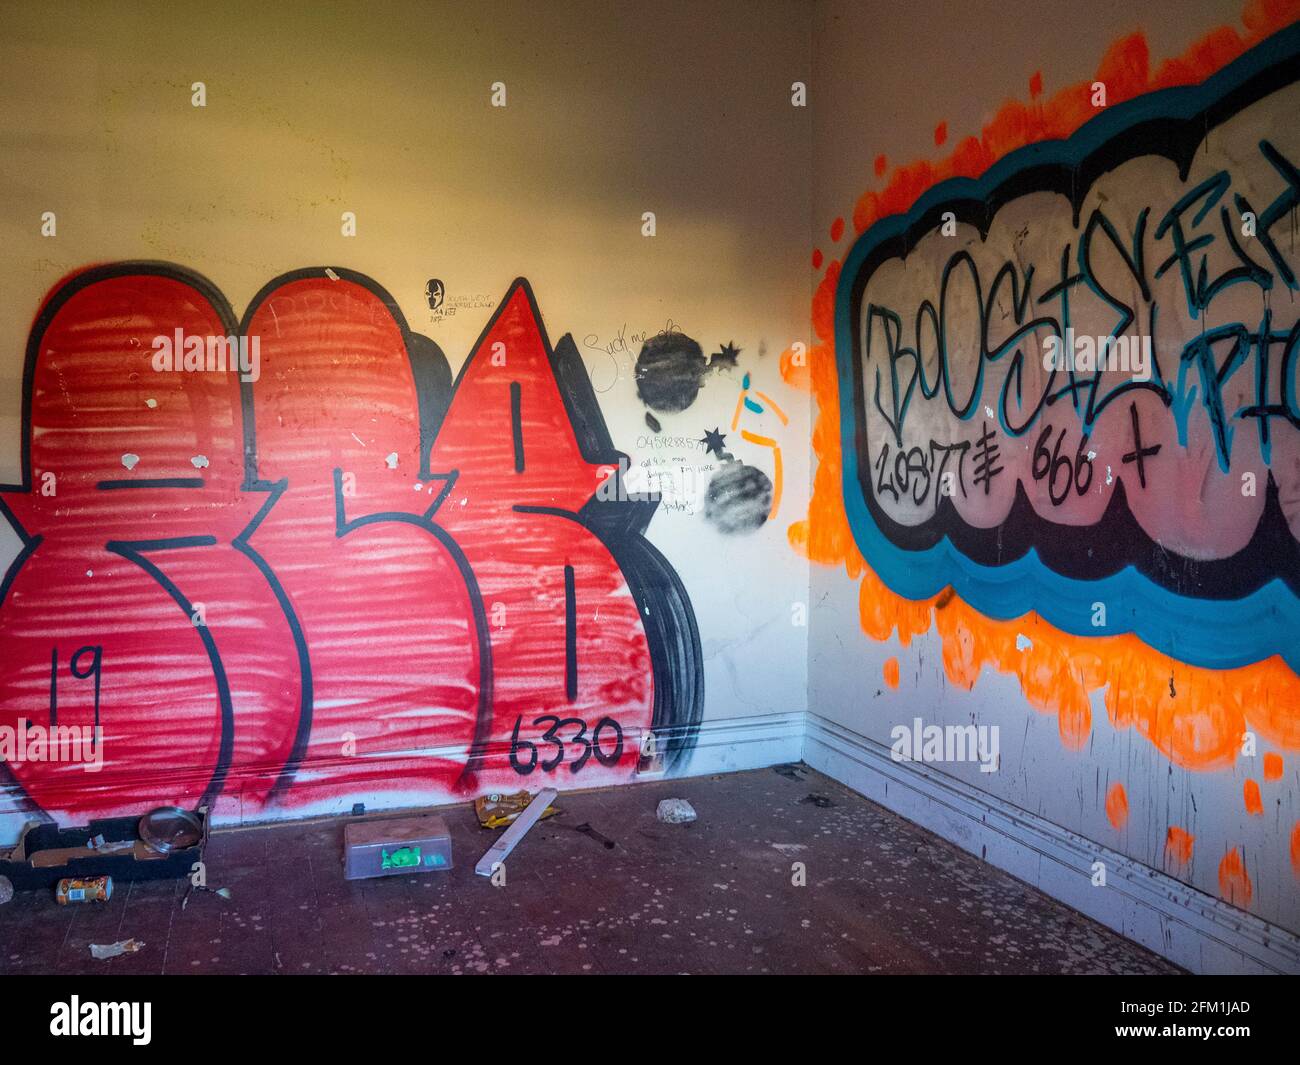 Litter on floor and graffiti and tags on wall in an abandoned house. Stock Photo